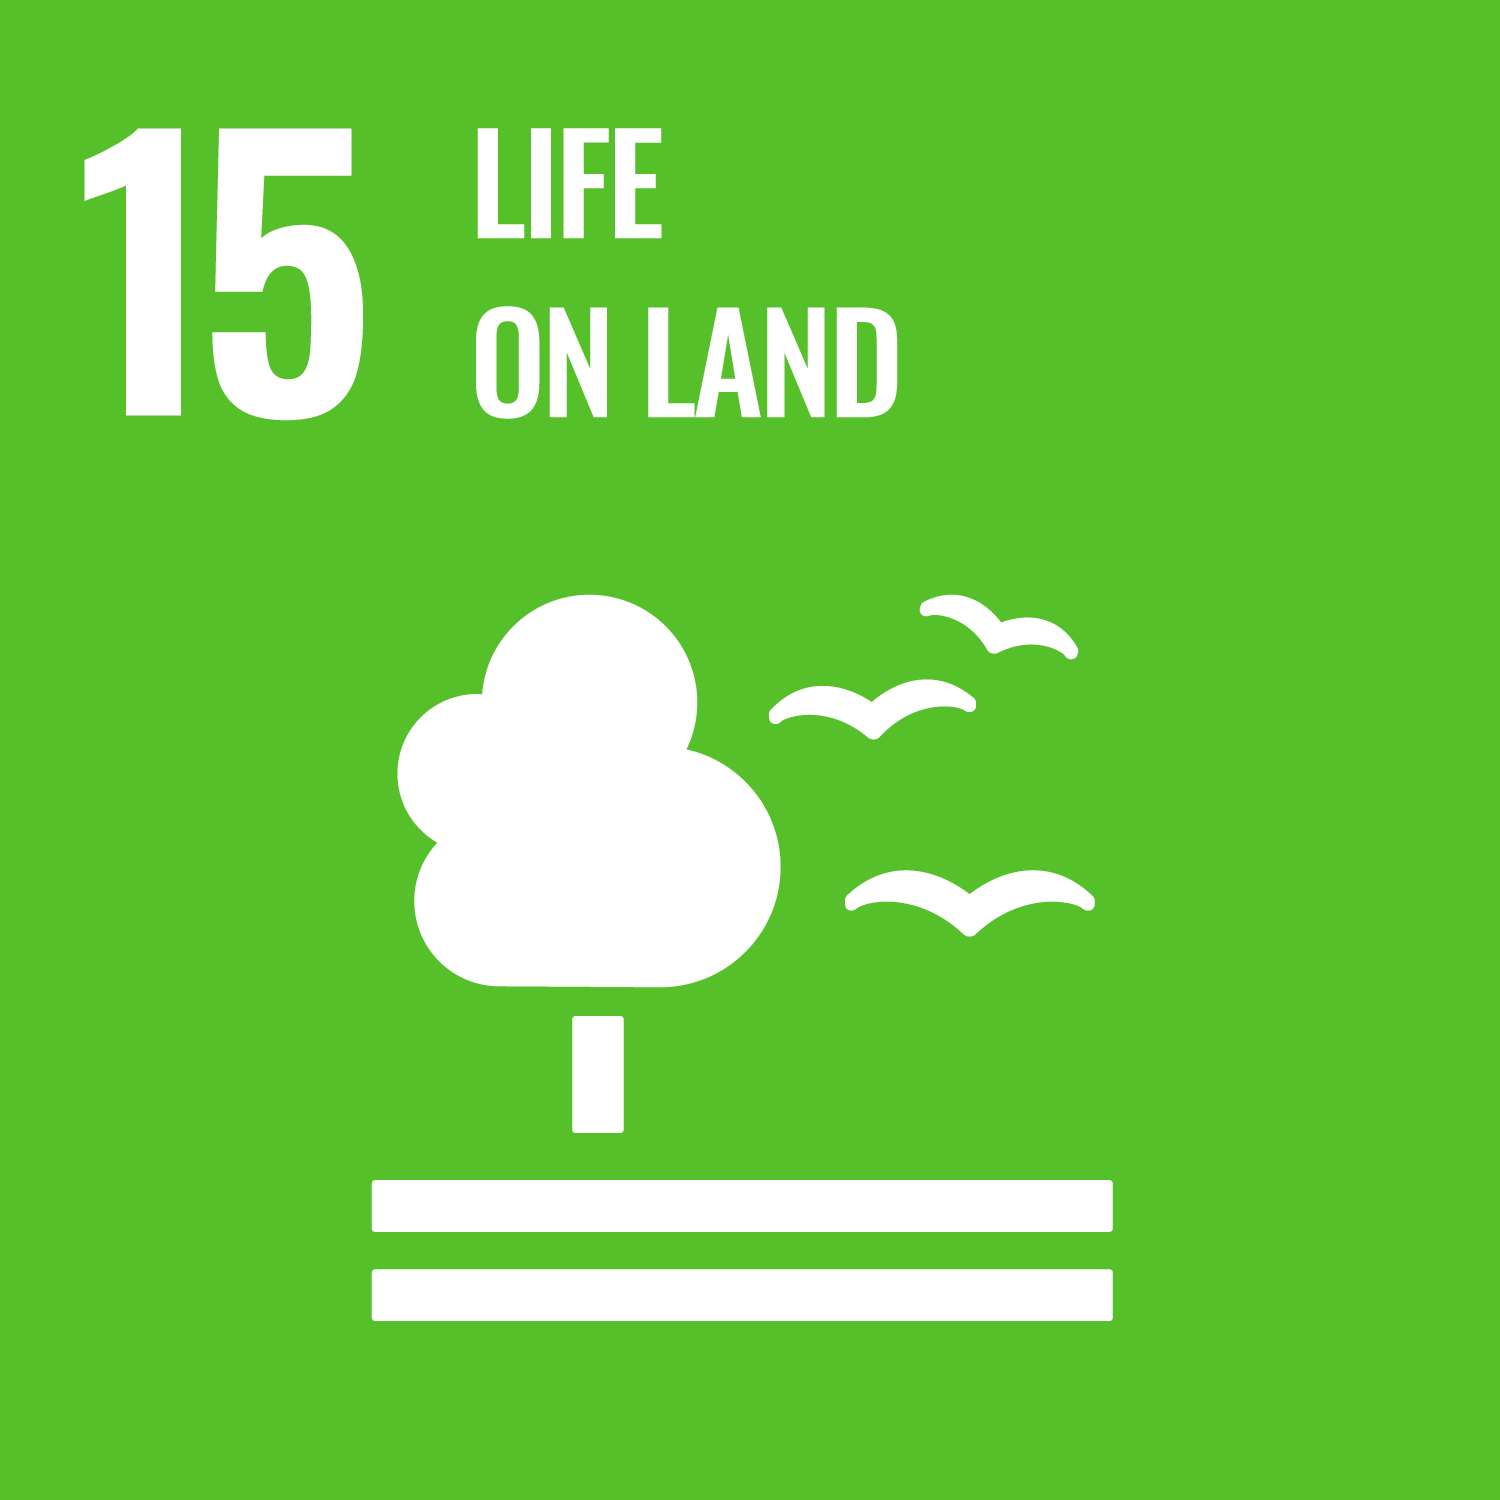 United Nations Sustainable Development Goal Number 15: Life on Land